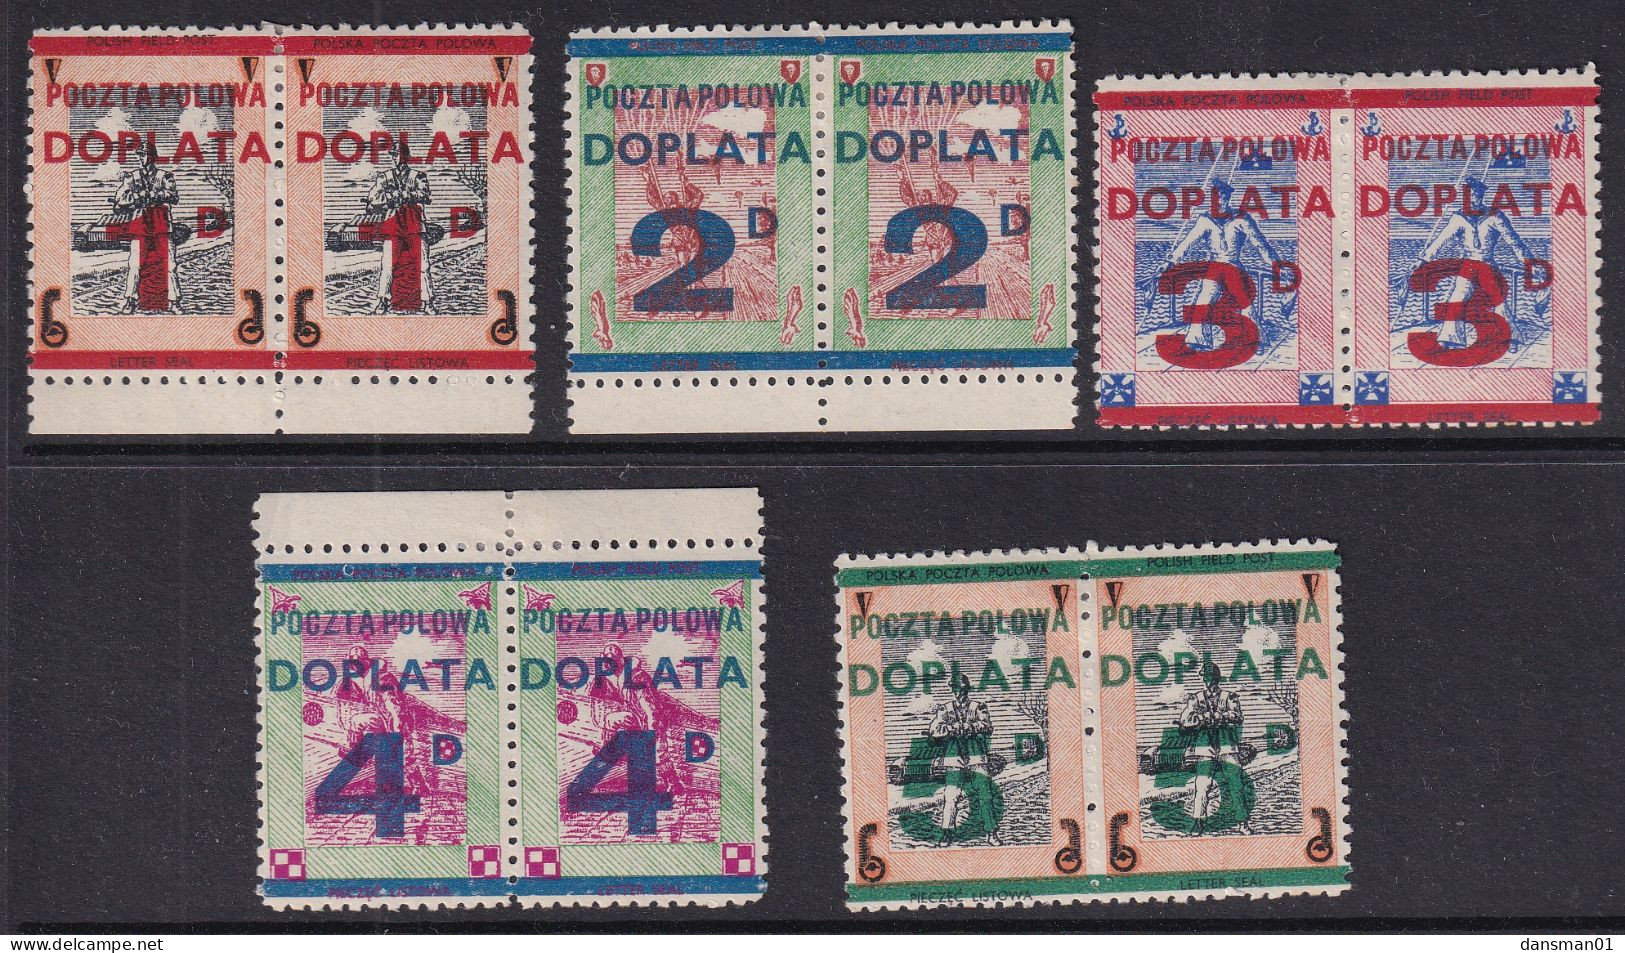 POLAND 1943 Field Post Seals Postage Dues Smith FD1-5 Mint Hinged - Liberation Labels